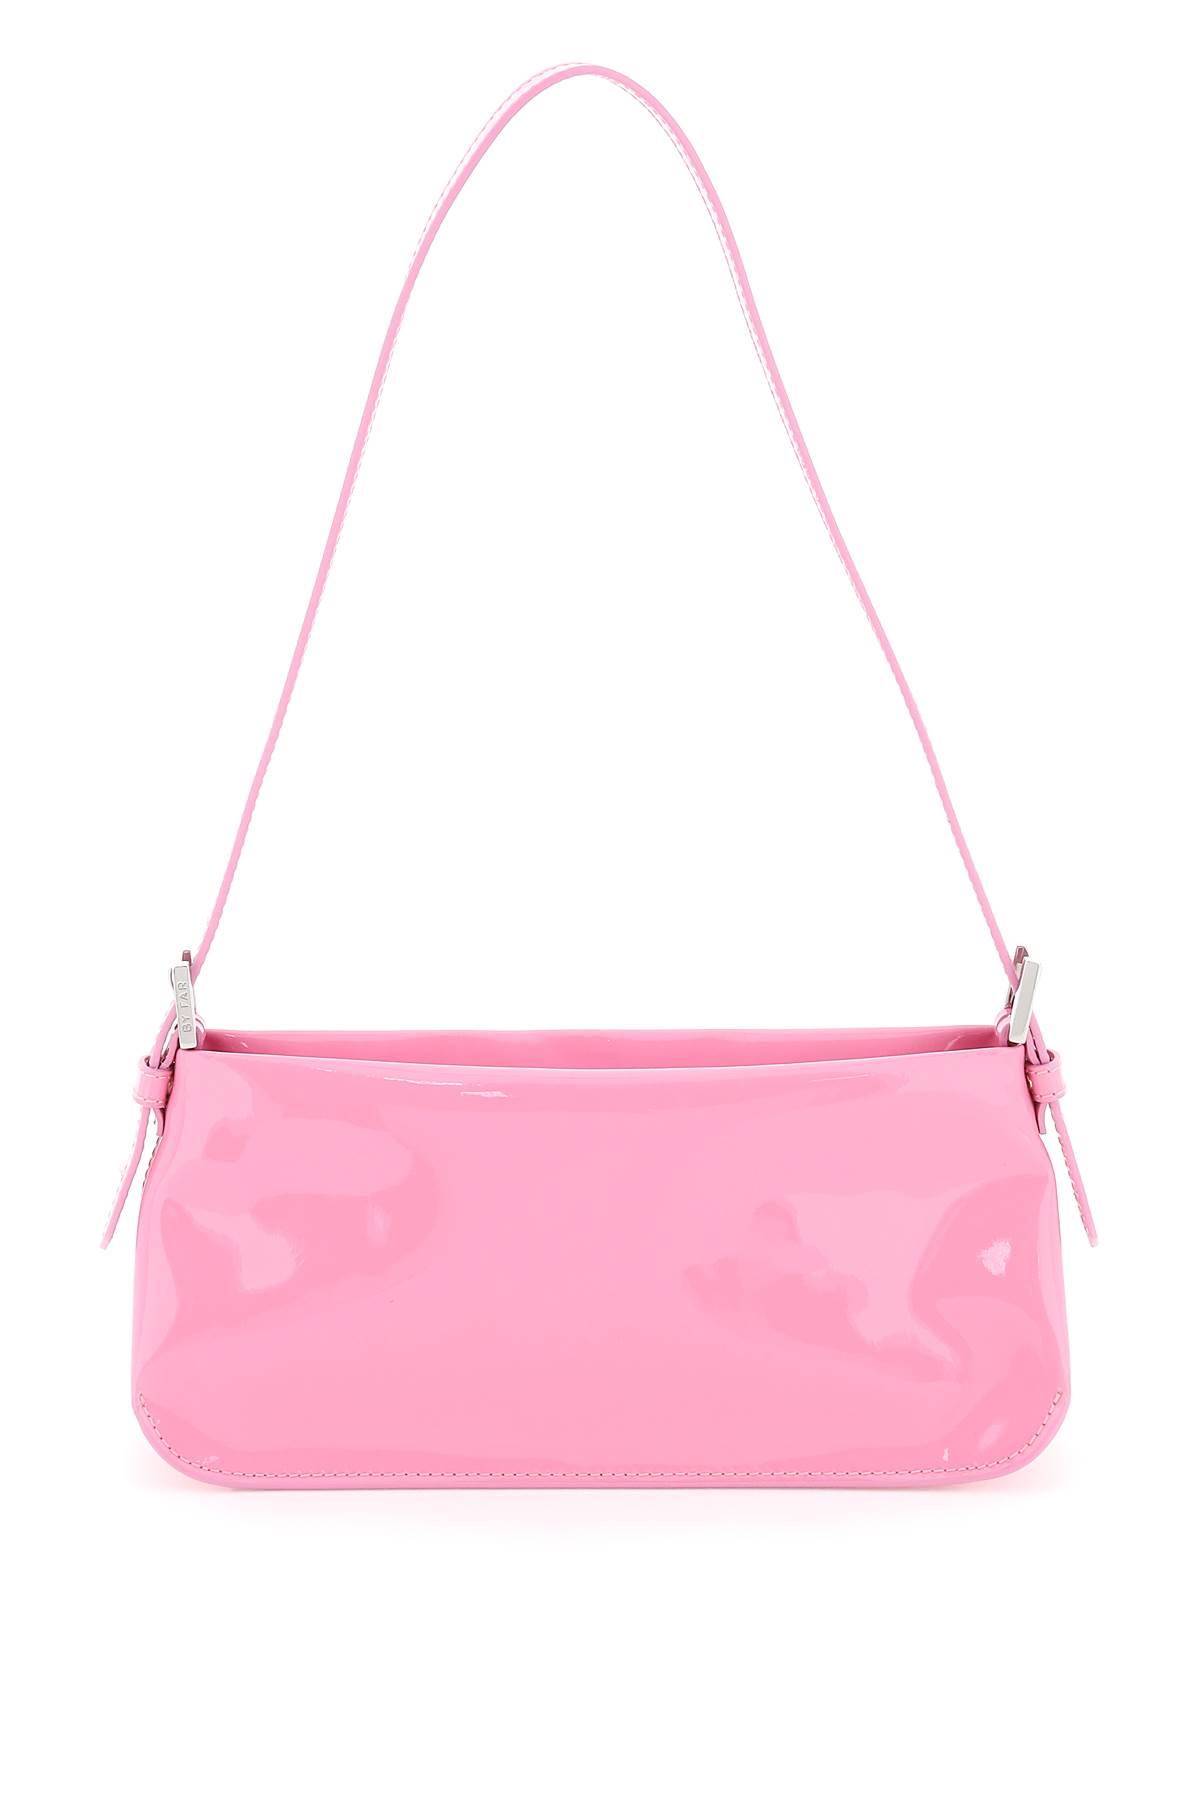 BY FAR Patent Leather Shoulder Bag Dulce